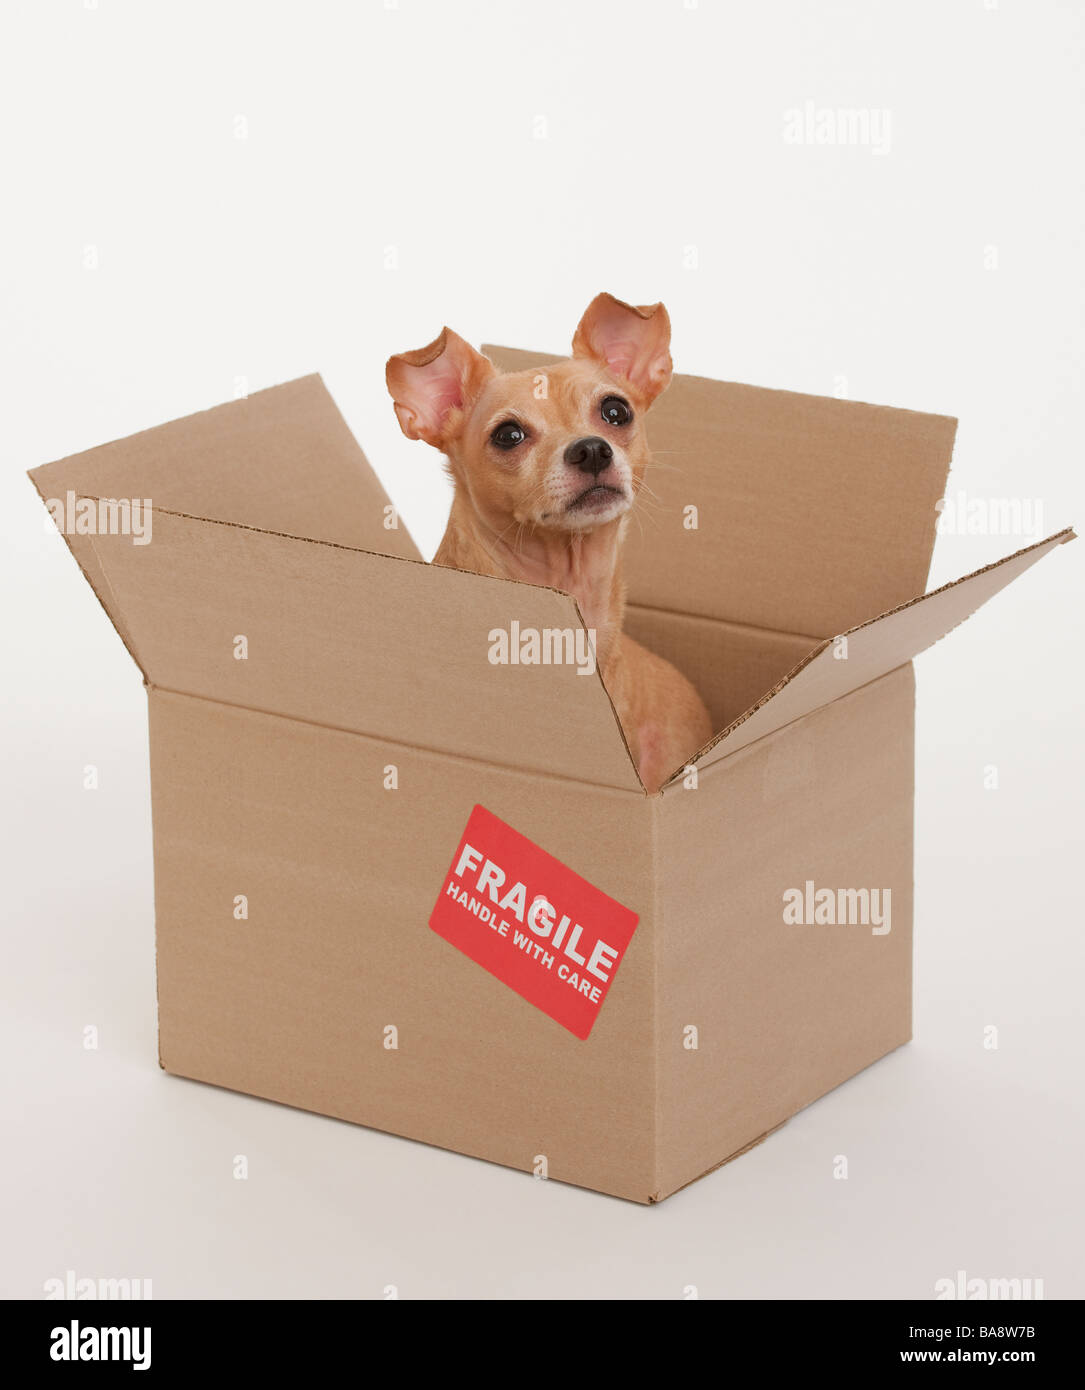 Small dog sitting in box marked fragile Stock Photo